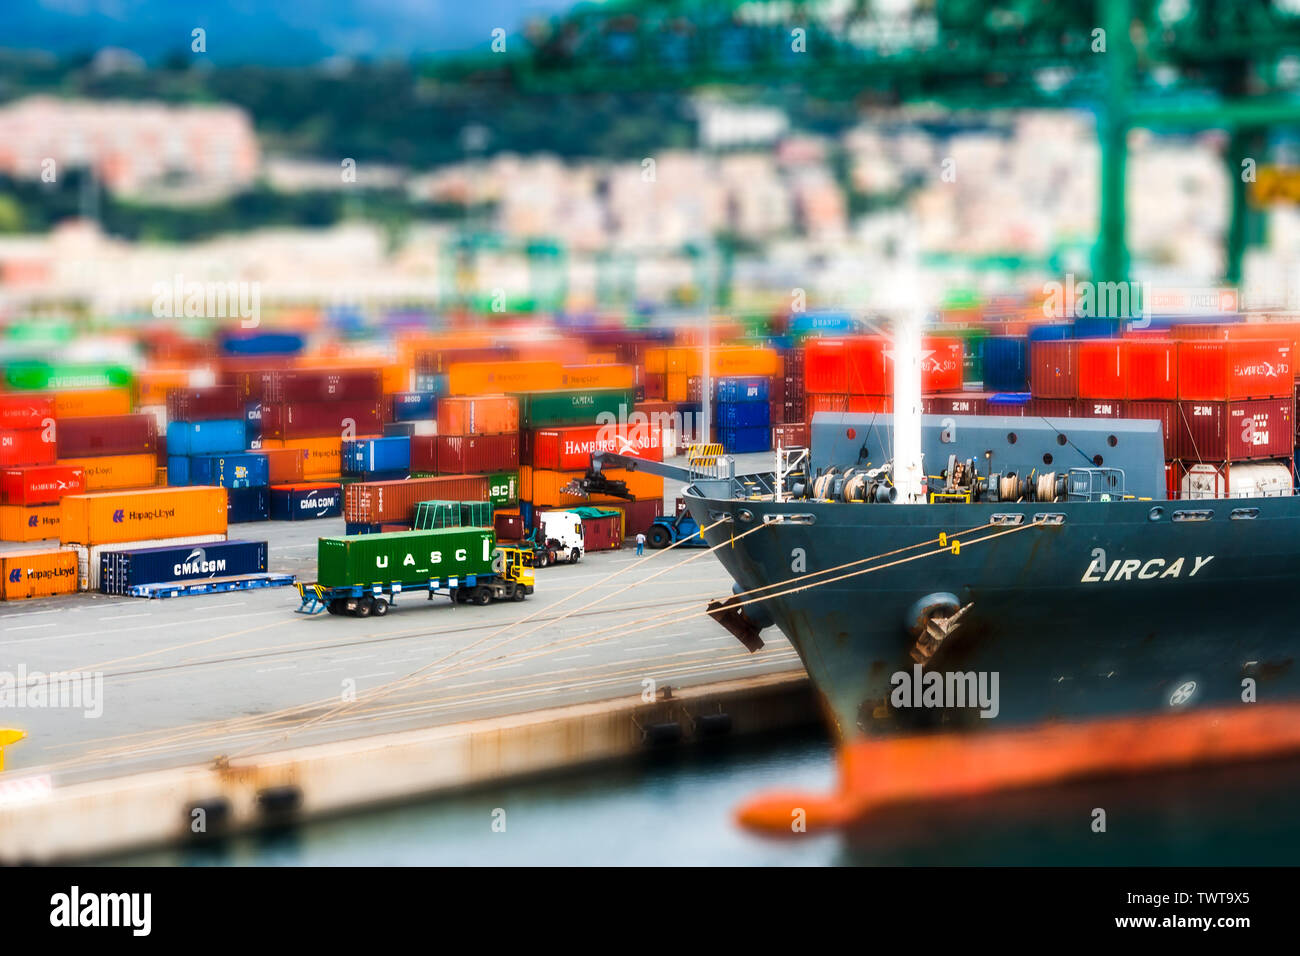 A miniature model of a port scene in Genoa, italy. Trucks are moving containers to be loaded onto a ship. Stock Photo